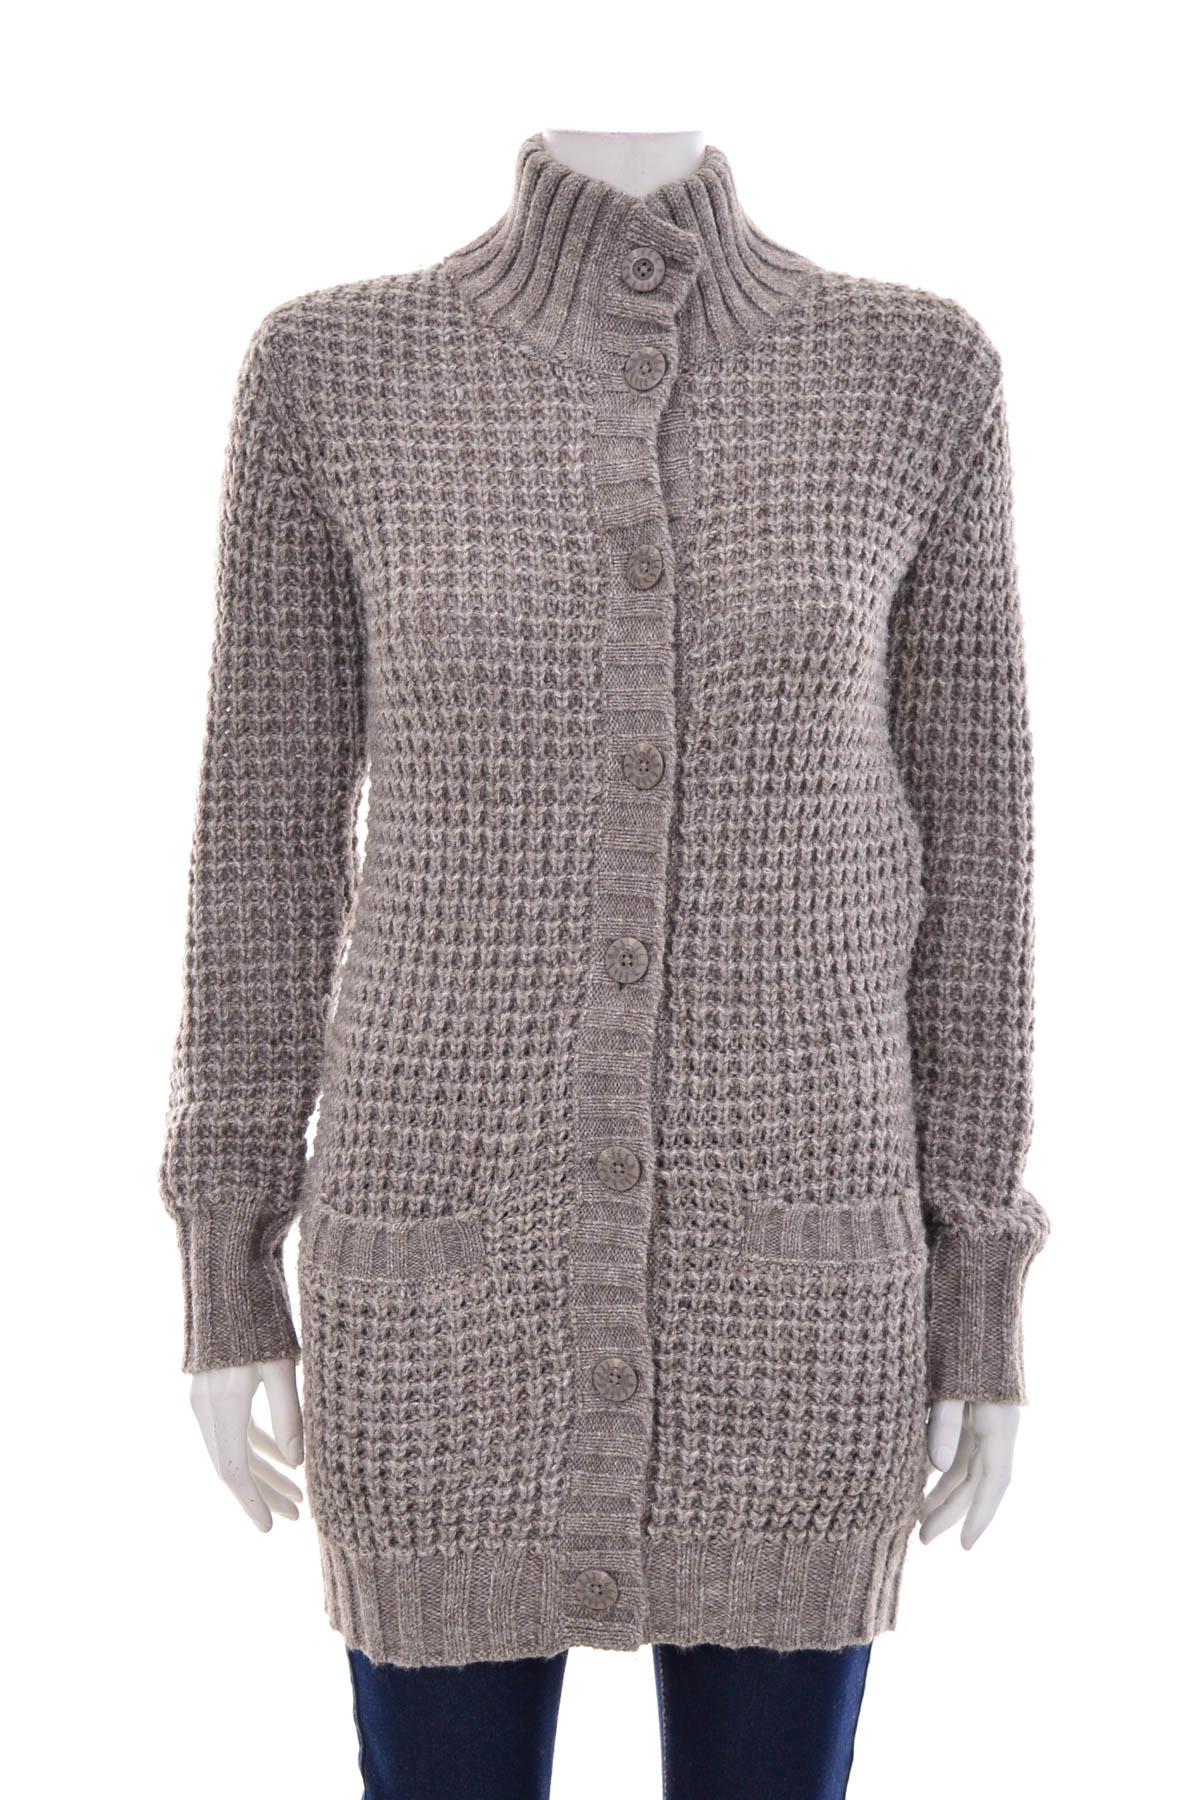 Women's cardigan - SELECTION by S.Oliver - 0